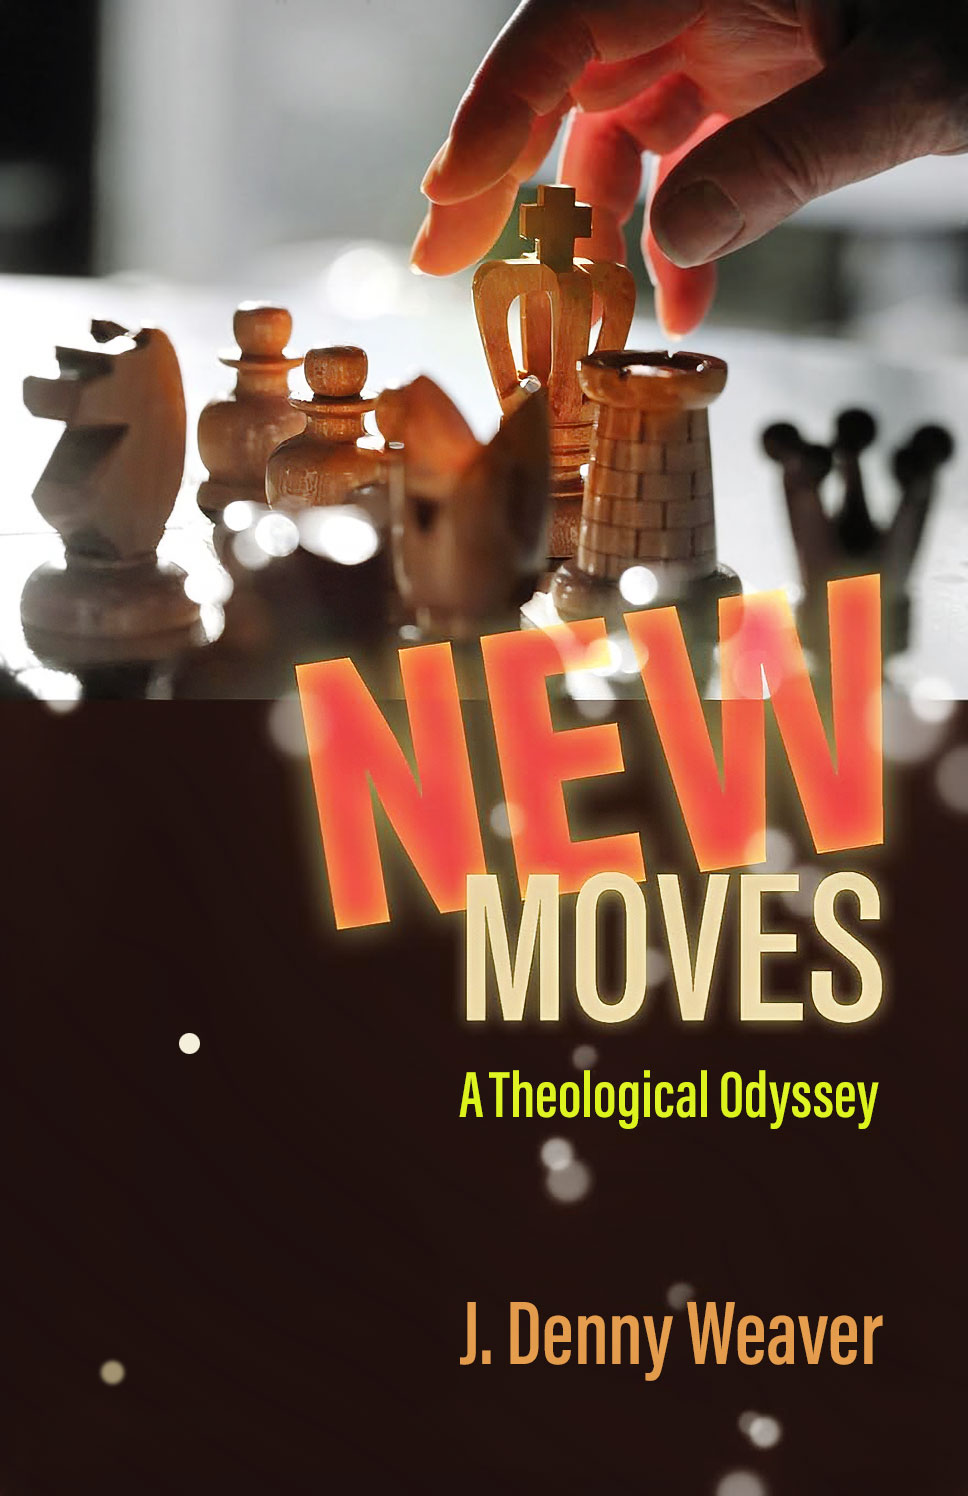 New Moves: A Theological Odyssey